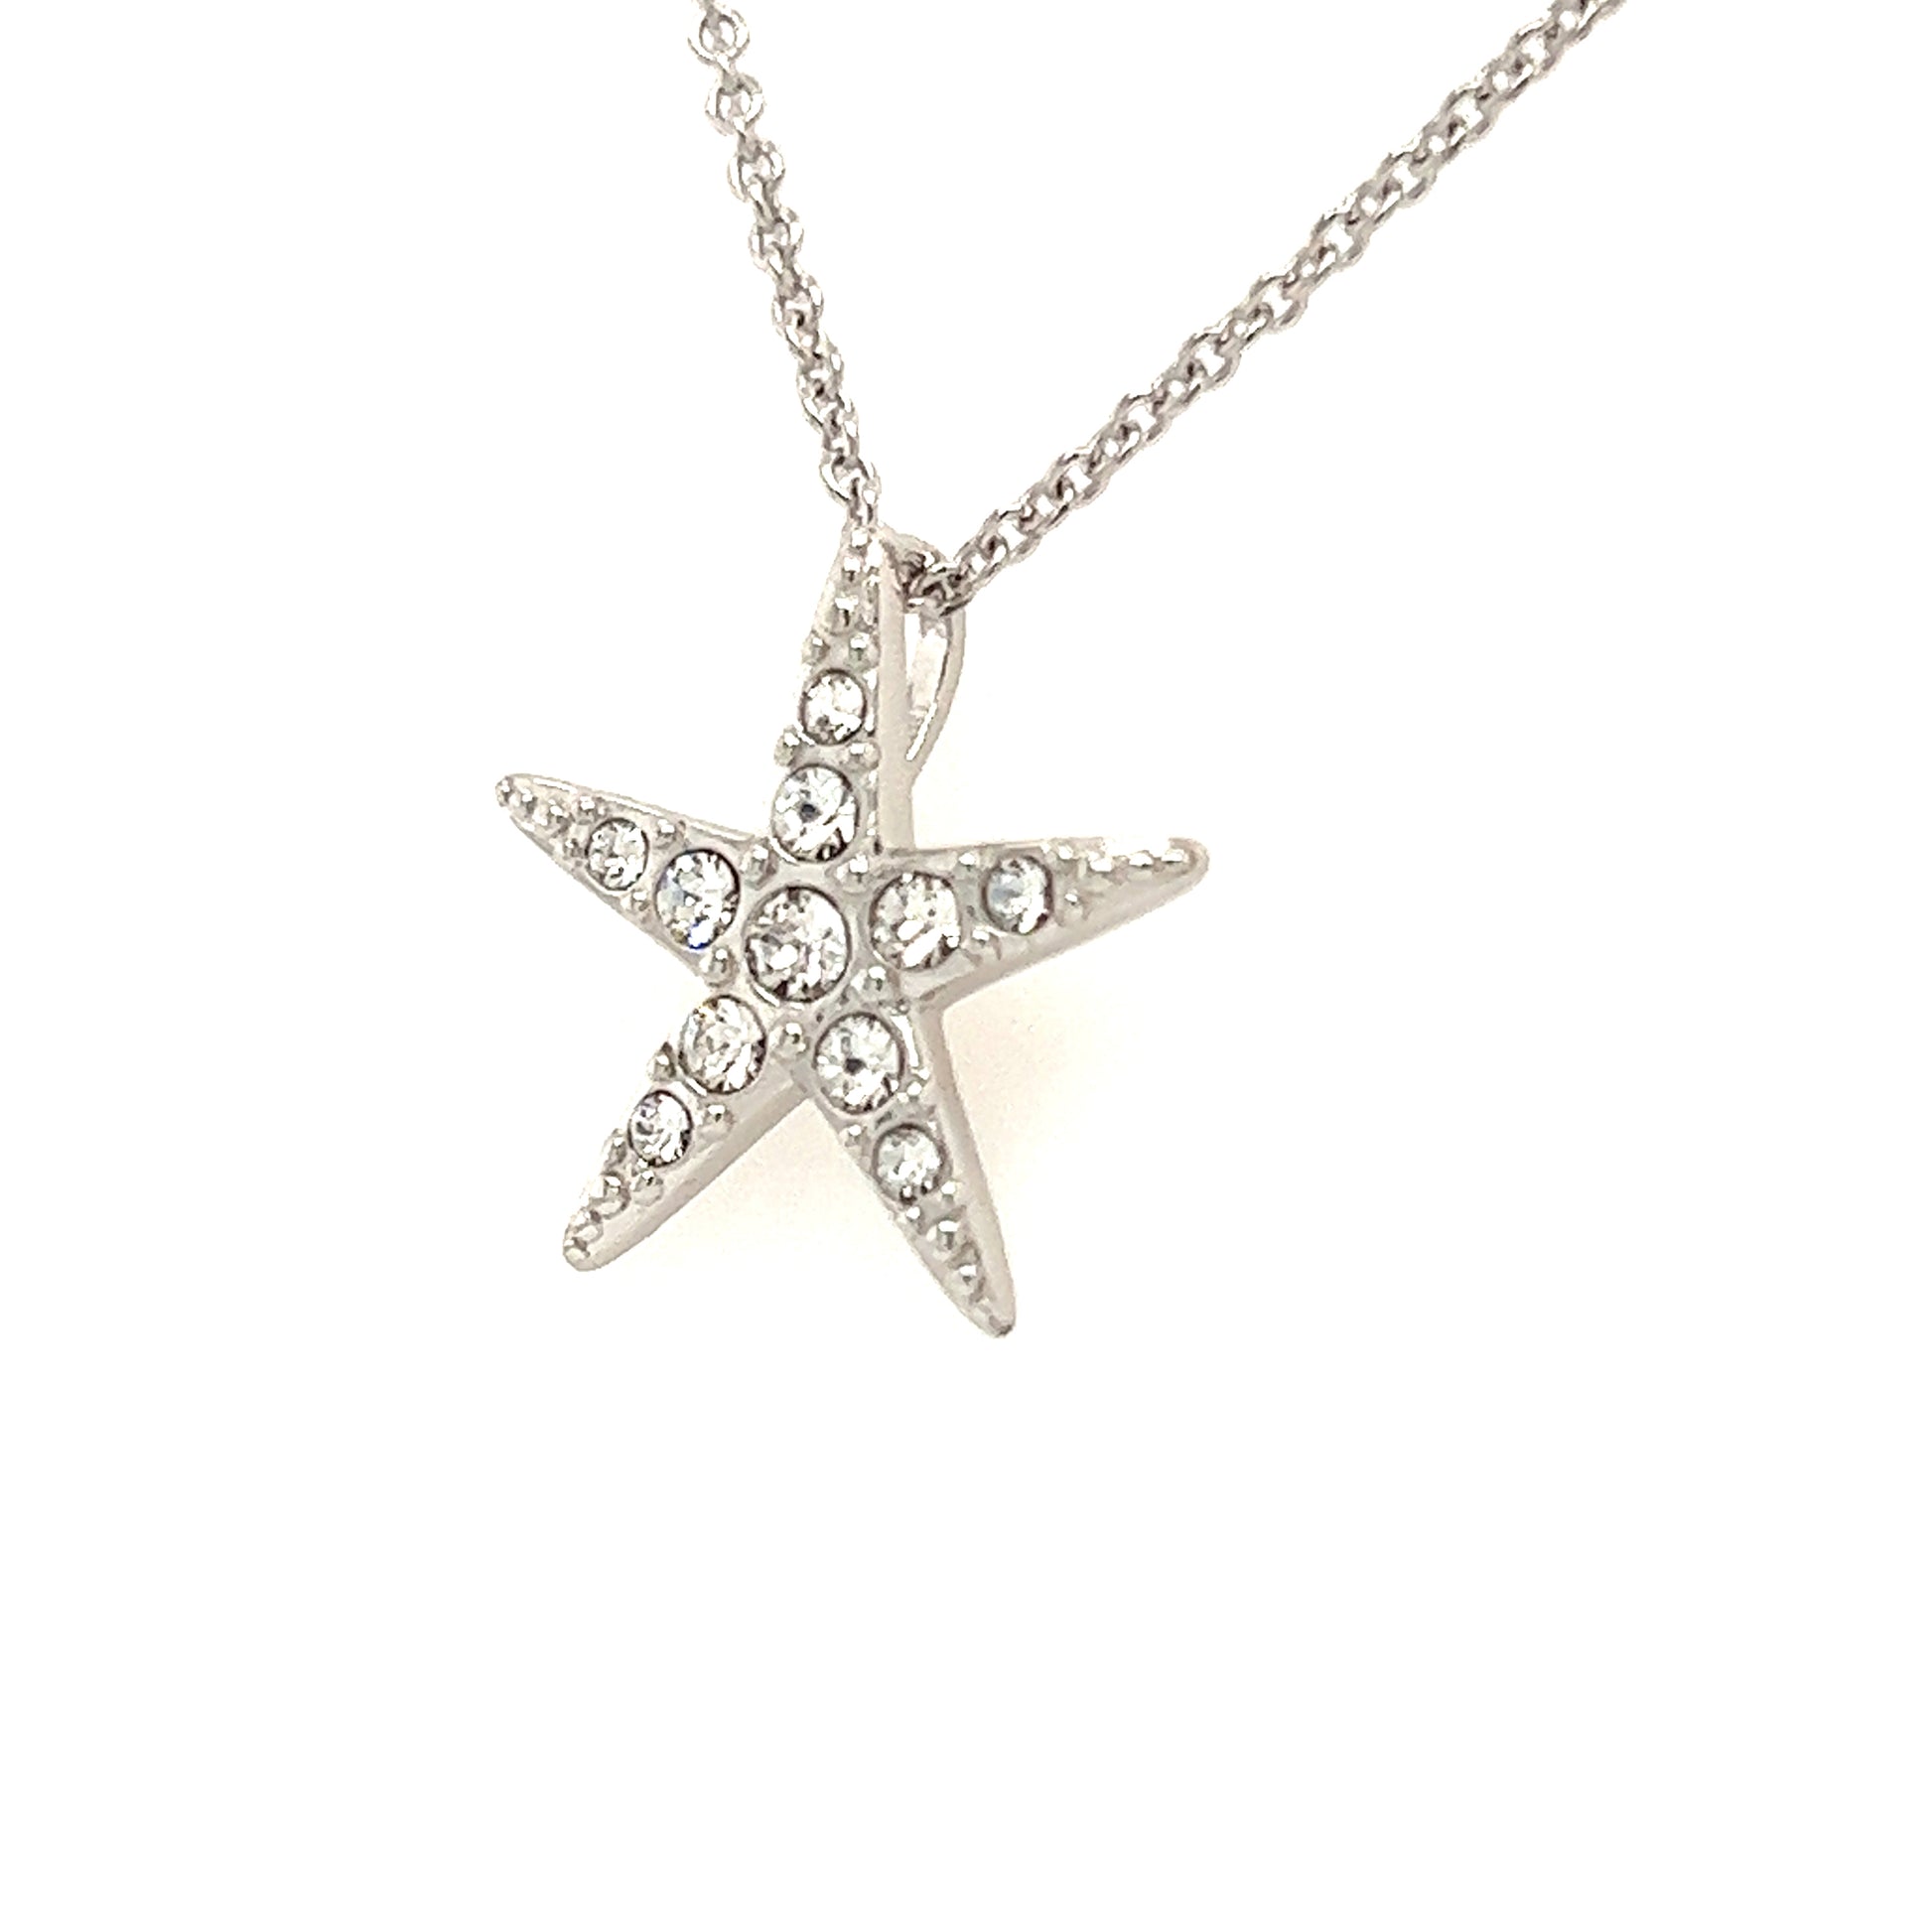 Small Starfish Necklace with White Crystals in Sterling Silver Left Side View